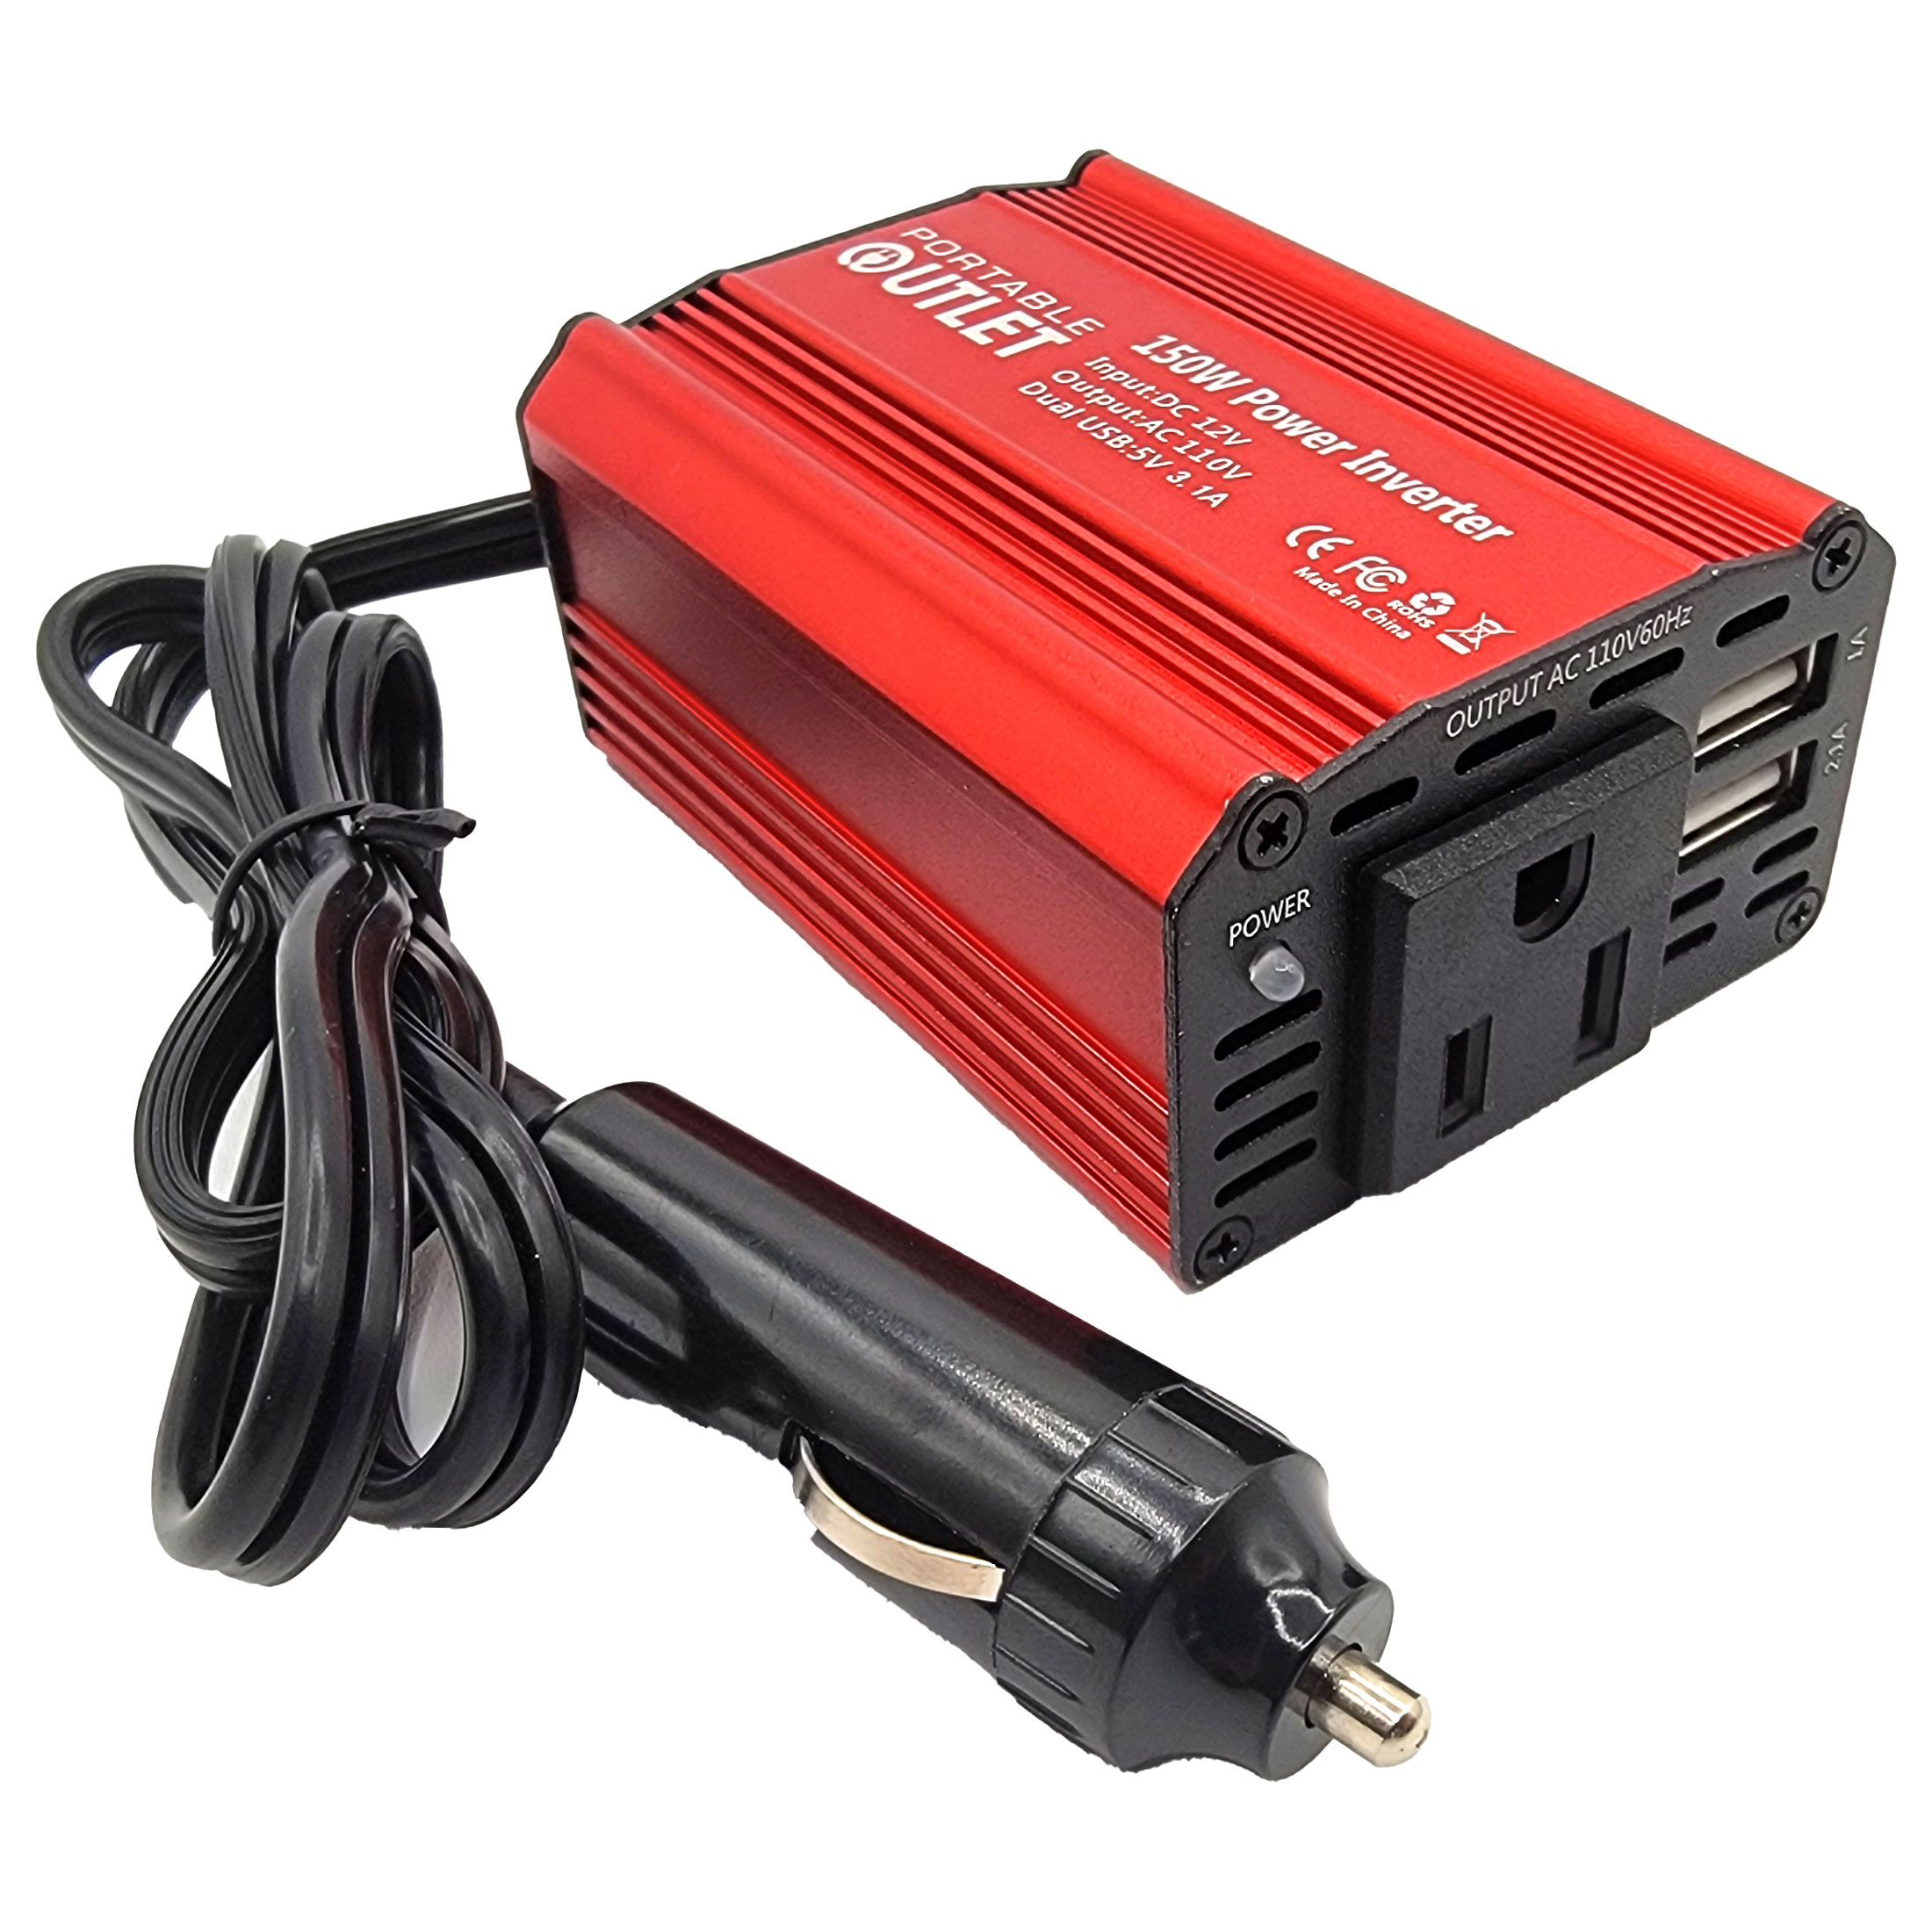 Photograph of red and black DC to AC car lighter adapter plugin power converter